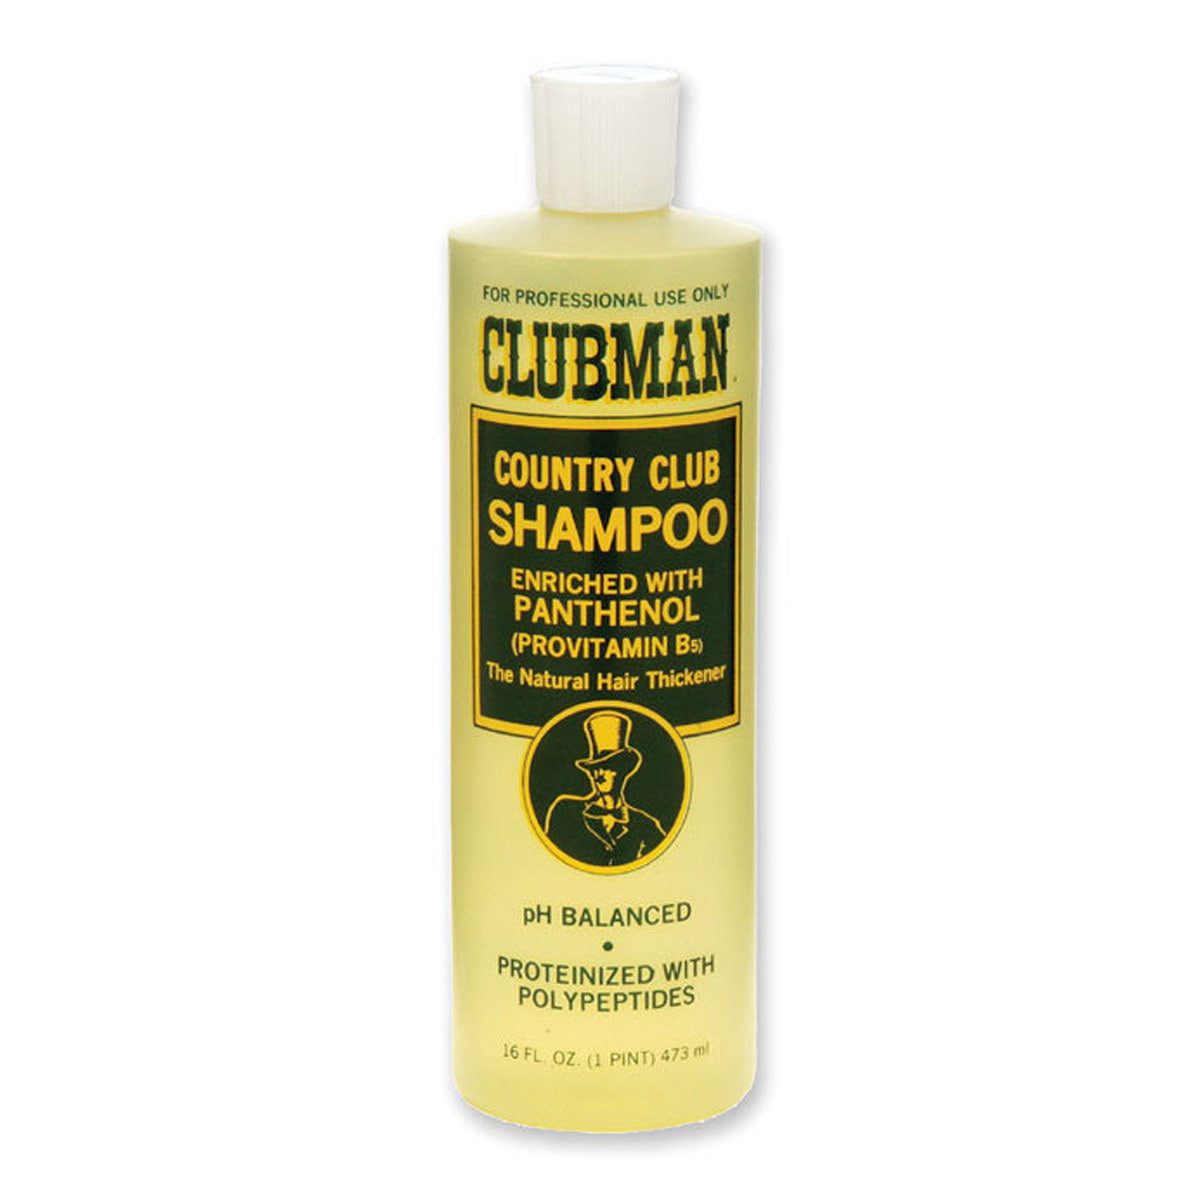 Primary image of Clubman Country Club Shampoo